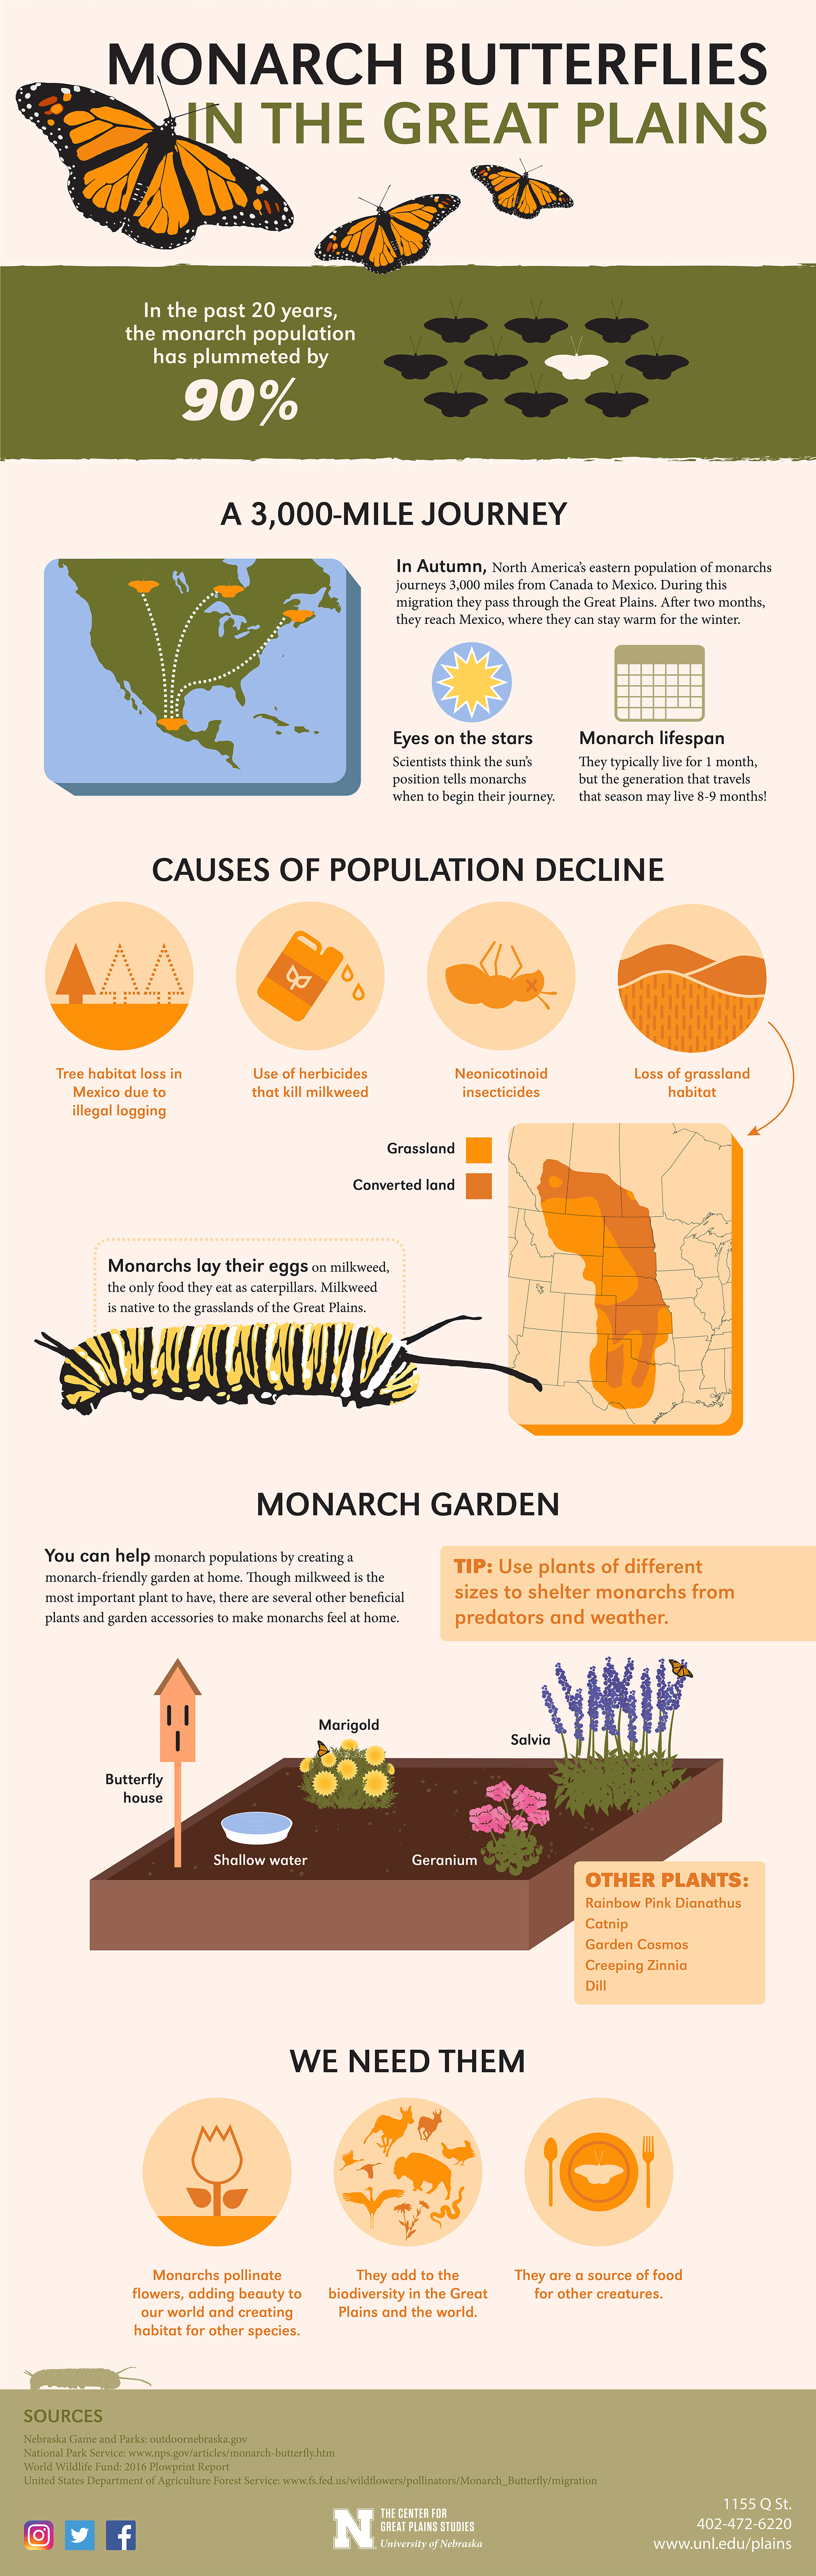 Monarchs in the Great Plains